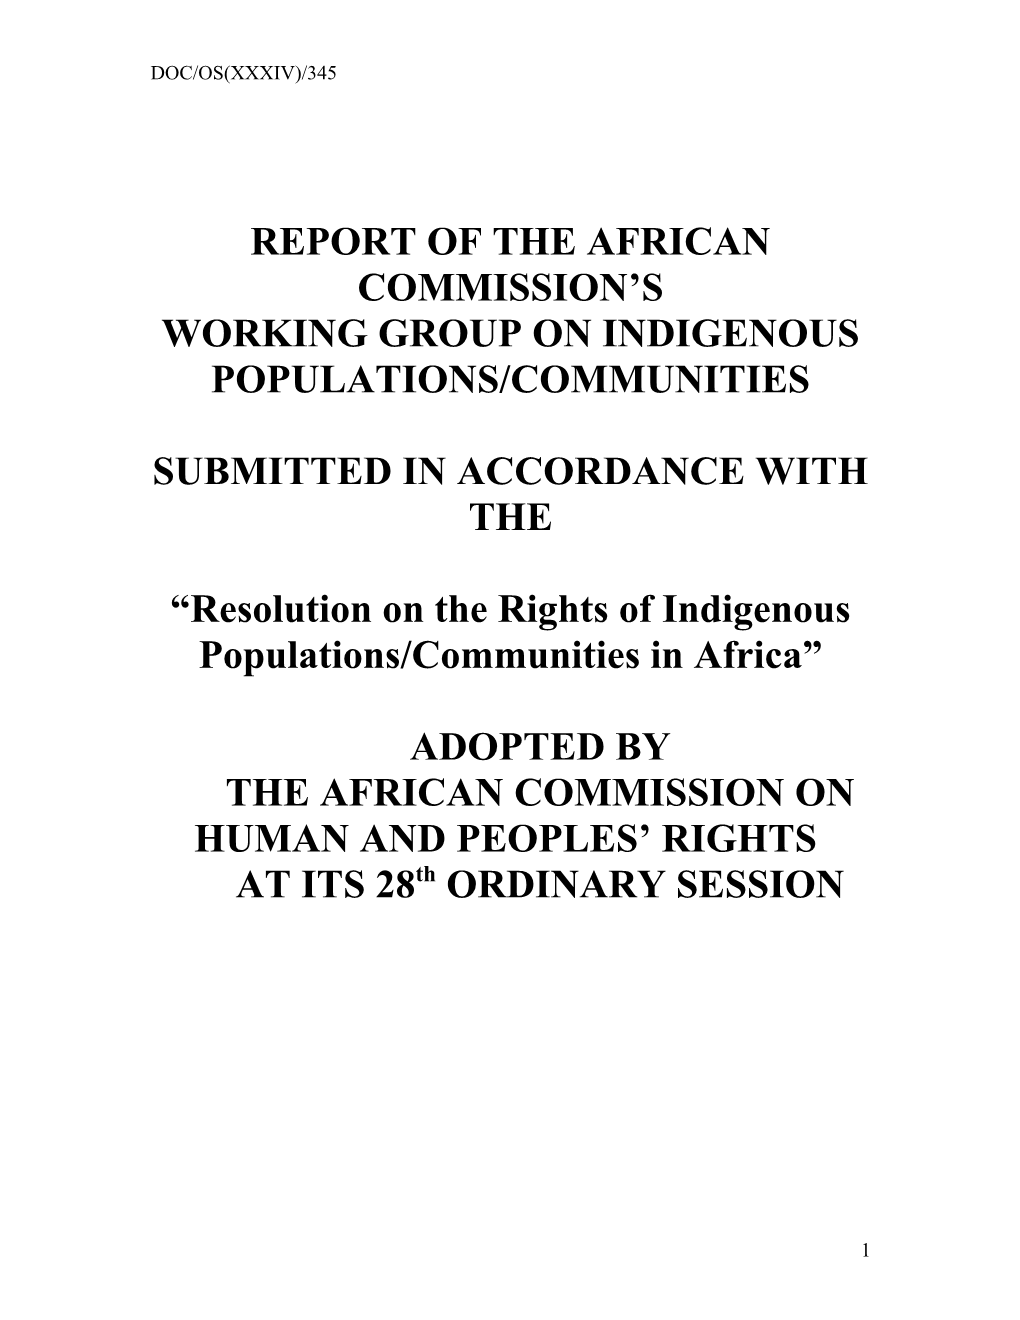 Presentation Of Report Of The Working Group On The Rights Of Indigenous Populations/Communities In Africa